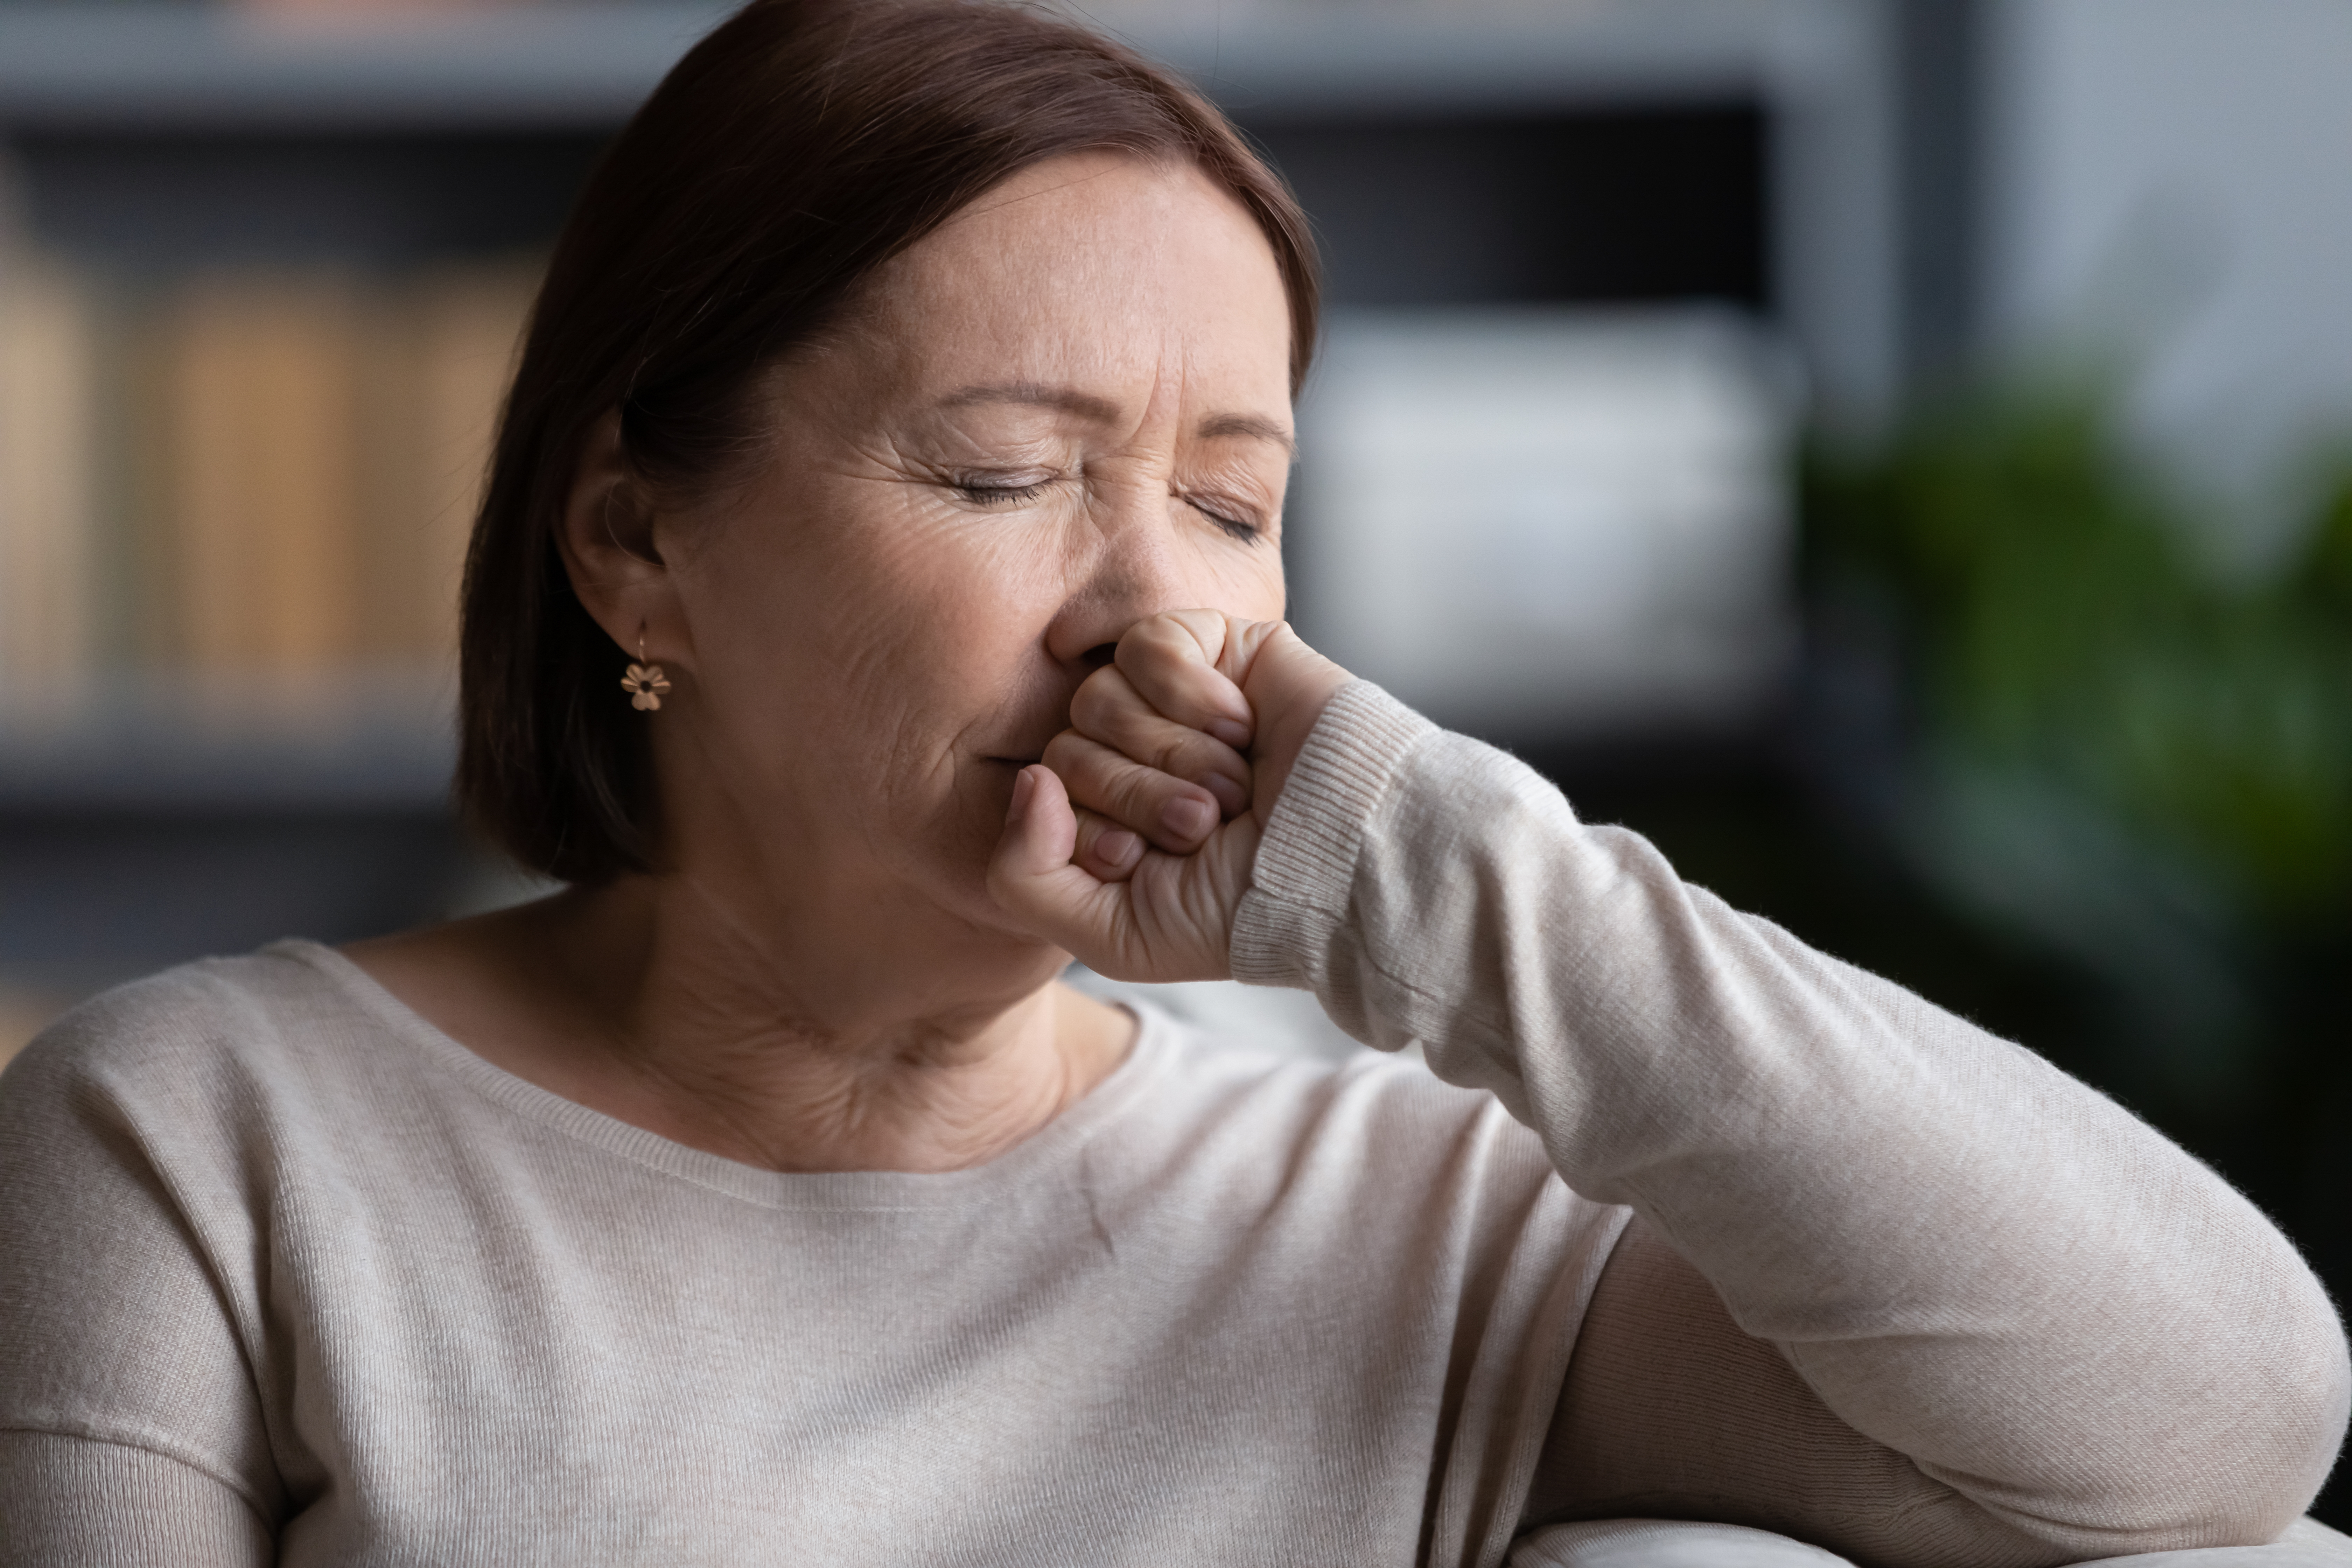 A stressed woman sitting with her eyes closed | Source: Shutterstock